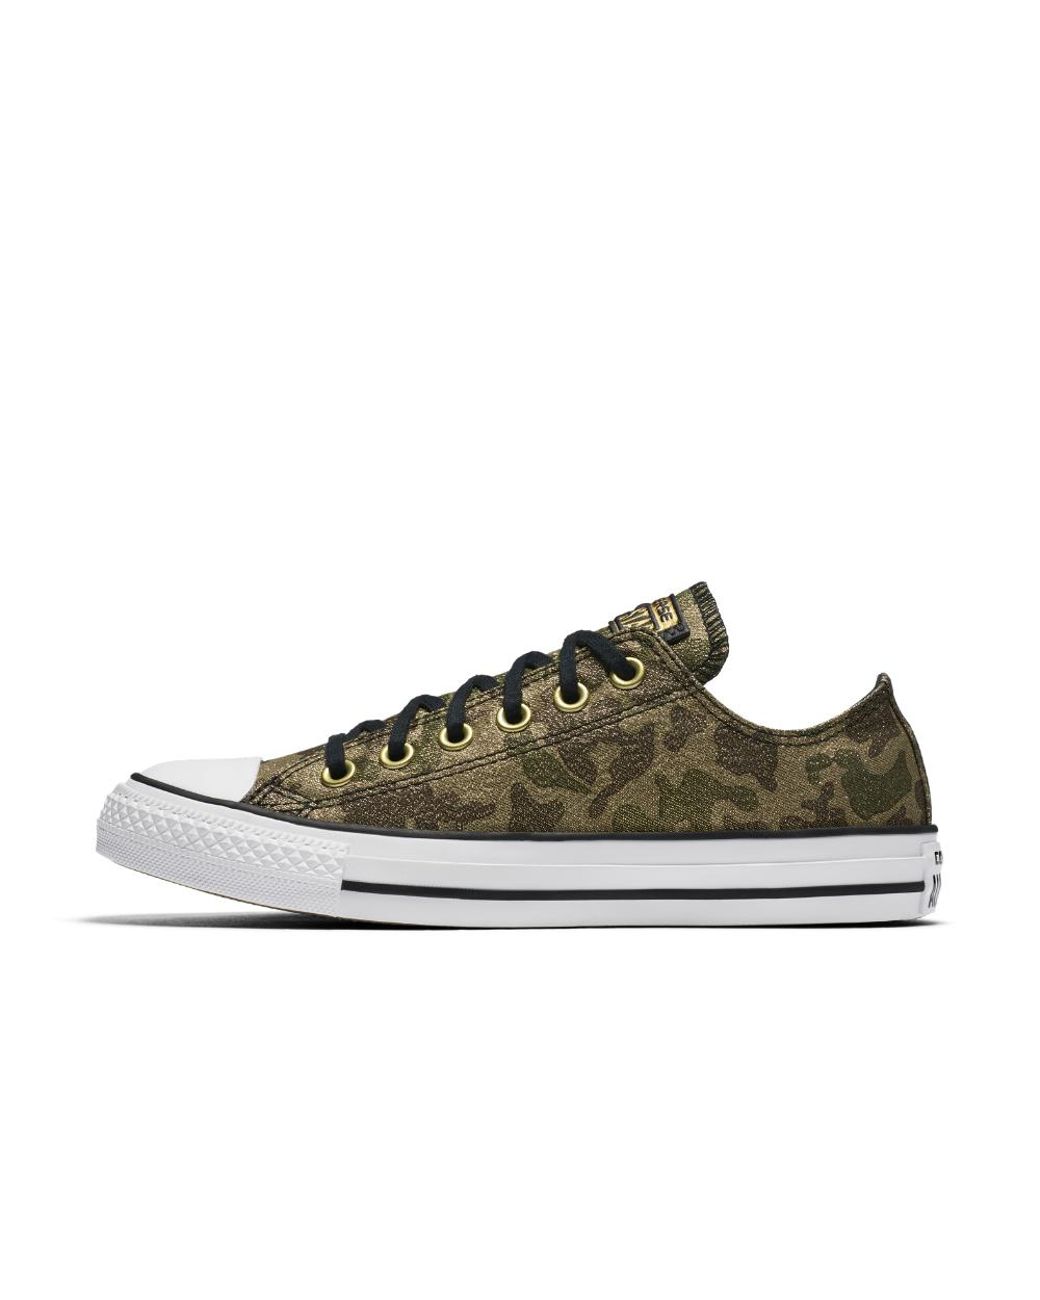 Vul in lepel tempo Converse Chuck Taylor All Star Lurex Camo Low Top Women's Shoe in Green |  Lyst